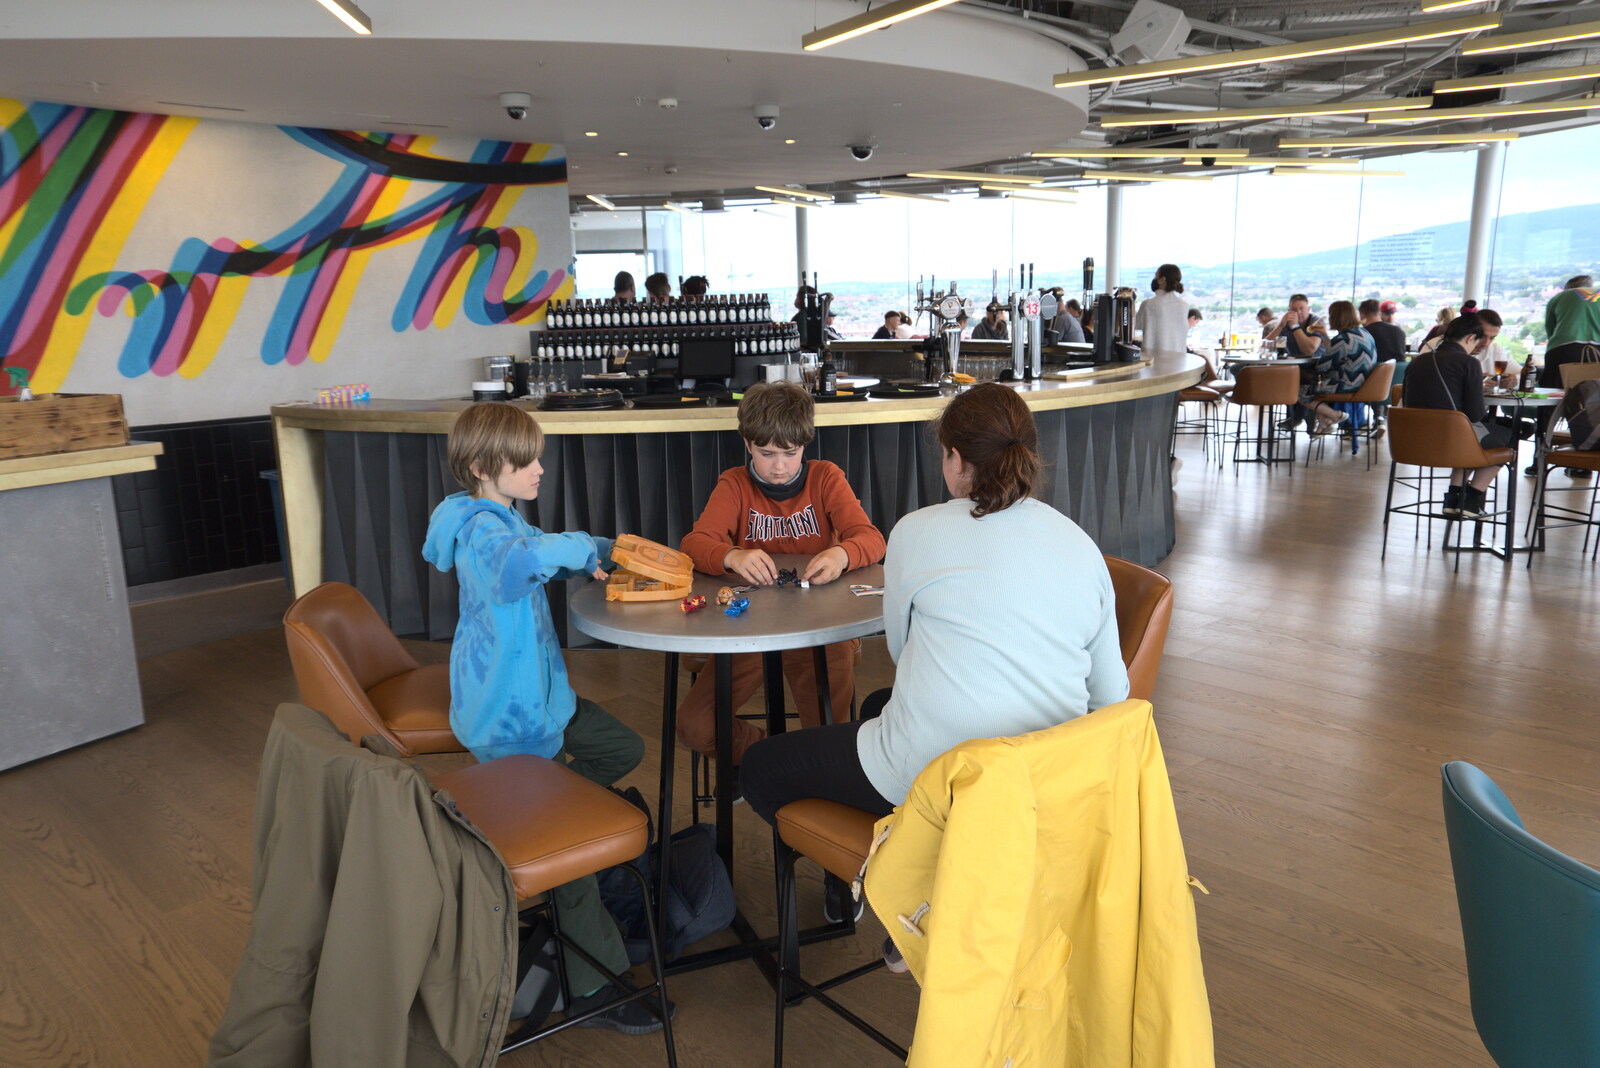 Harry, Fred and Isobel in the Gravity Bar from The Guinness Storehouse Tour, St. James's Gate, Dublin, Ireland - 17th August 2021